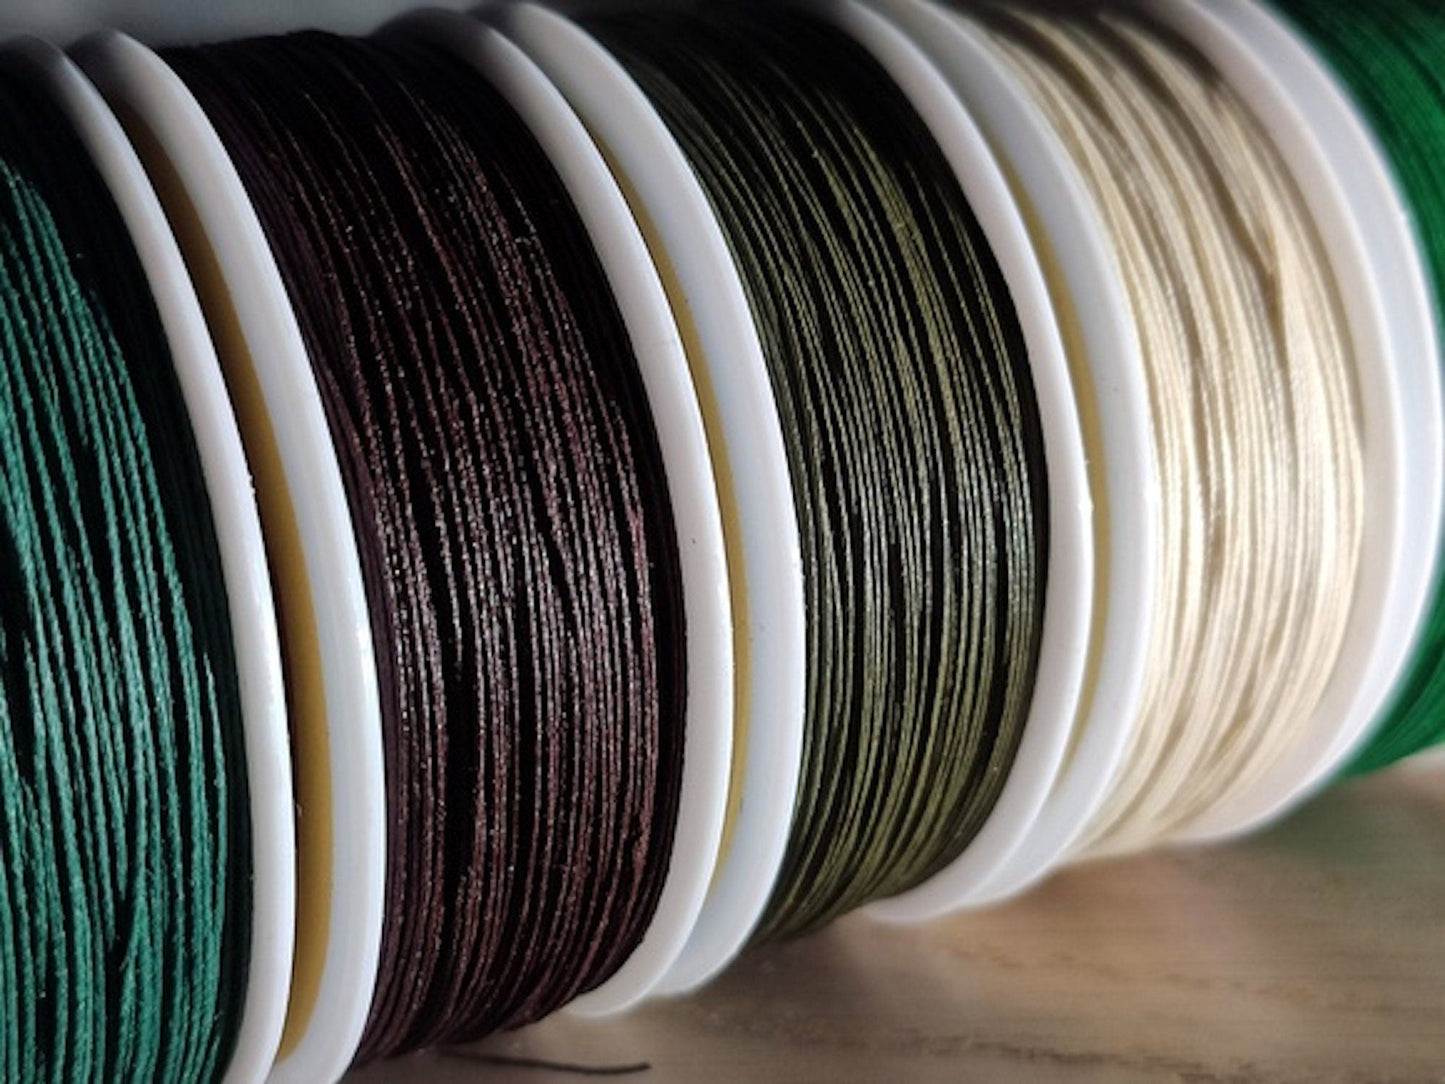 Famous ZJ#0 0.32-0.35mm Linen Waxed Threads For Handmade Letherwork, Thread For Leather, Sewing Thread ThreadsZJ